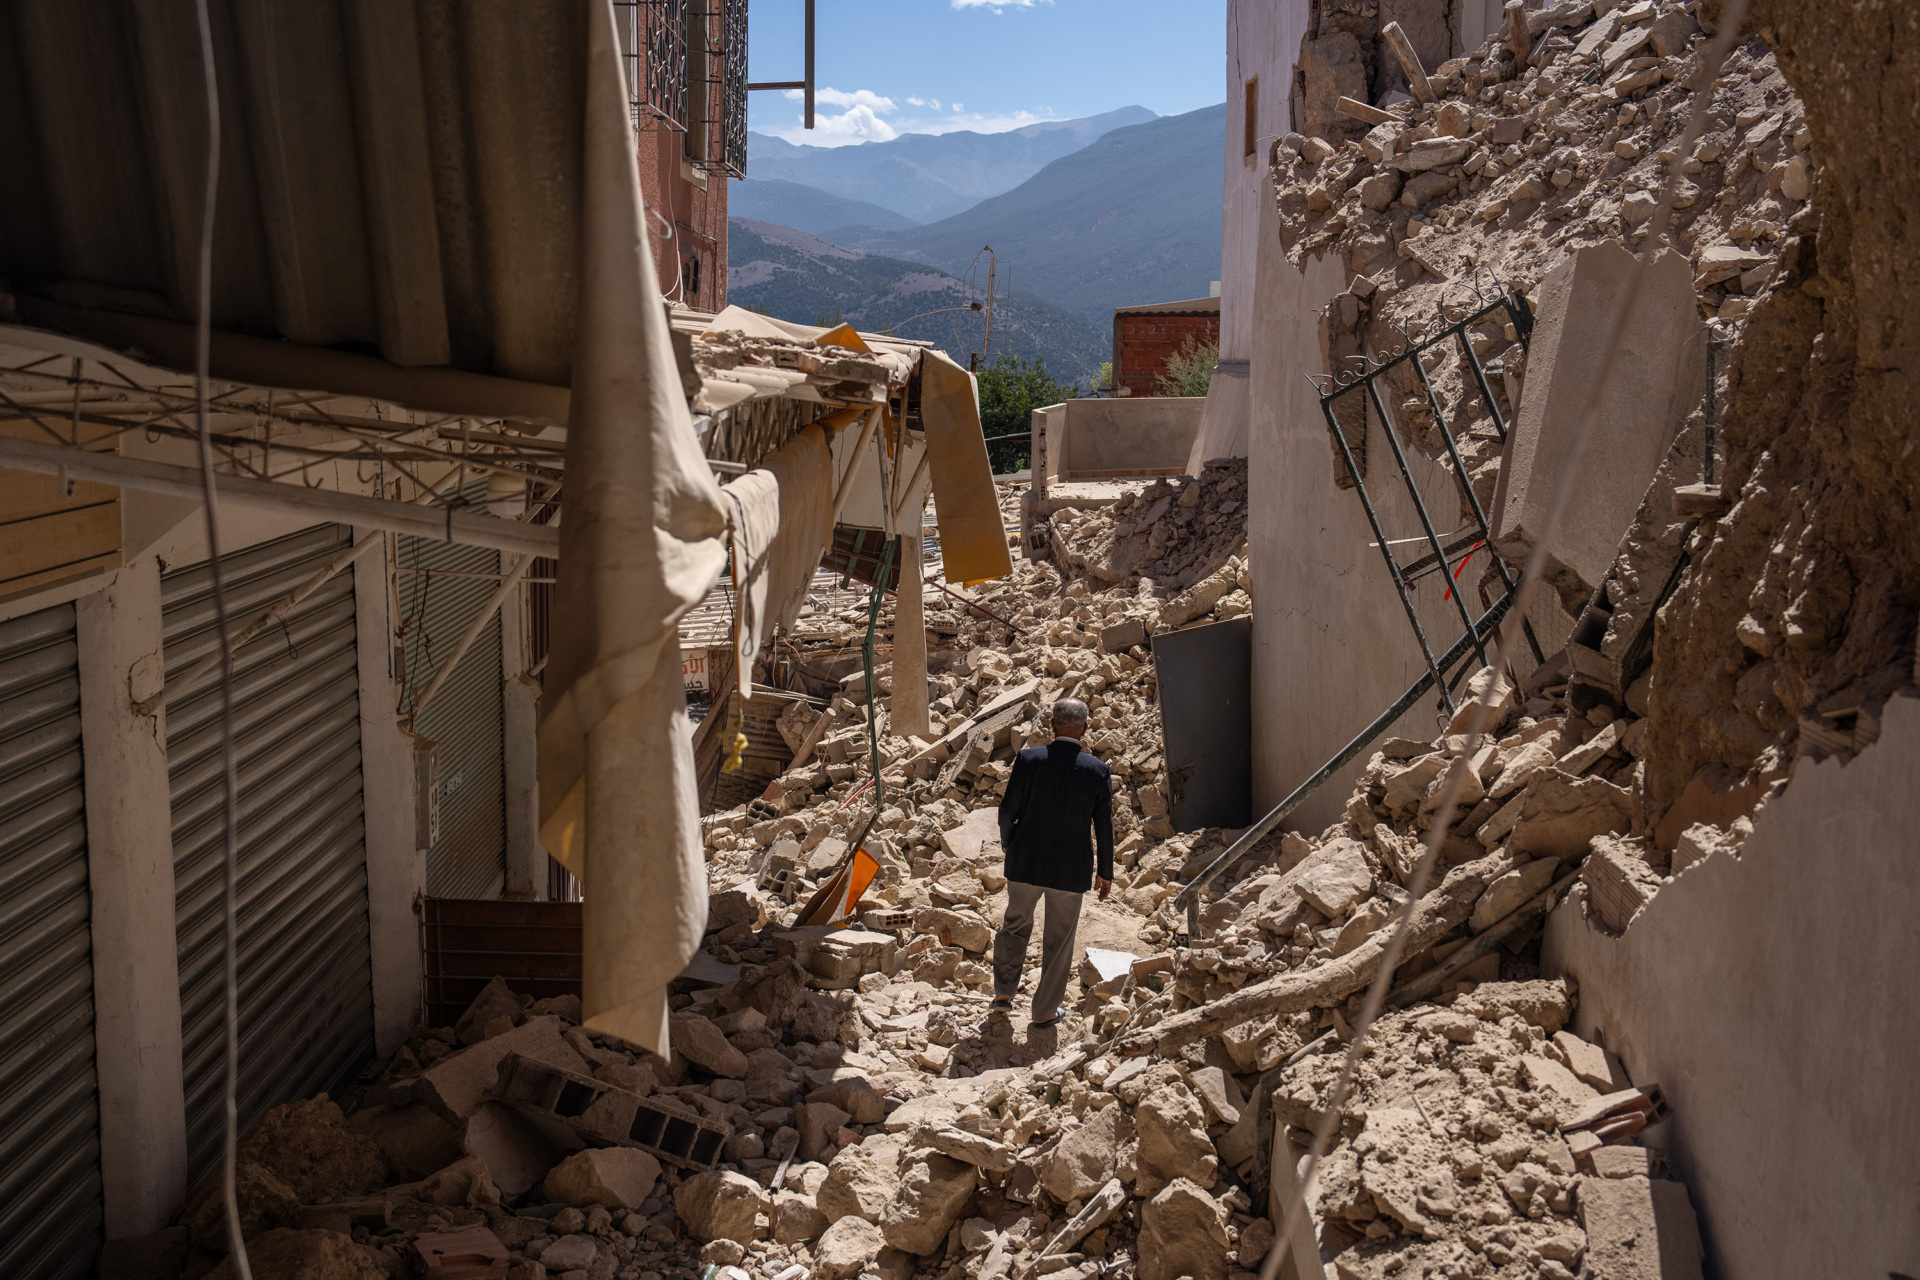 MOULAY BRAHIM, MOROCCO - SEPTEMBER 10: A man walks amongst the rubble of collapsed buildings following yesterday's earthquake, on September 10, 2023 in Moulay Brahim, Morocco. A huge earthquake measuring 6.8 on the Richter scale has hit central Morocco. Whilst the epicentre was in a sparsely populated area of the High Atlas Mountains, its effects have been felt 71km away in Marrakesh, a major tourist destination, where many buildings have collapsed and thousands of deaths have been reported. (Photo by Carl Court/Getty Images)